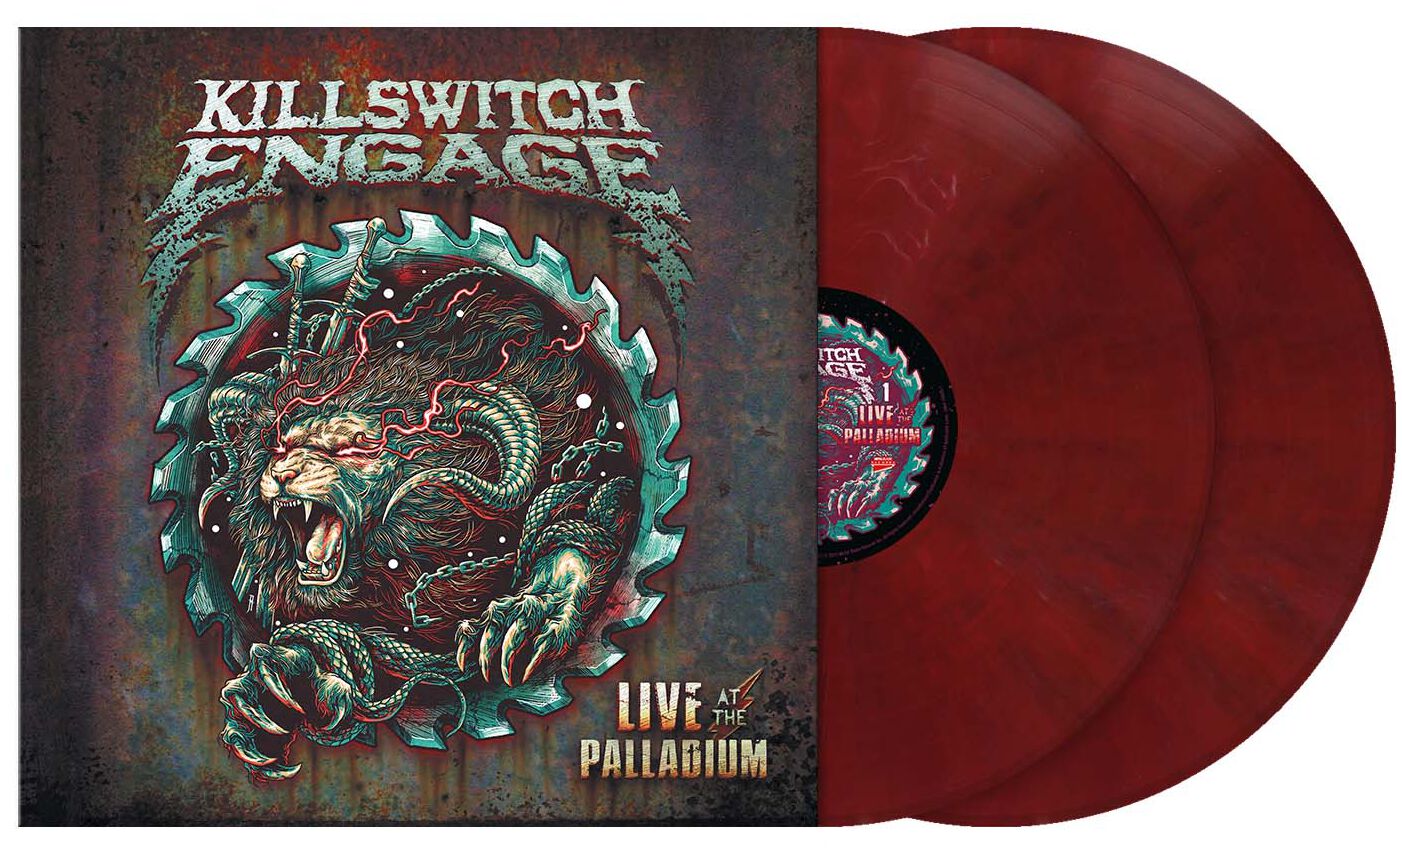 Killswitch Engage Live at the Palladium LP marbled